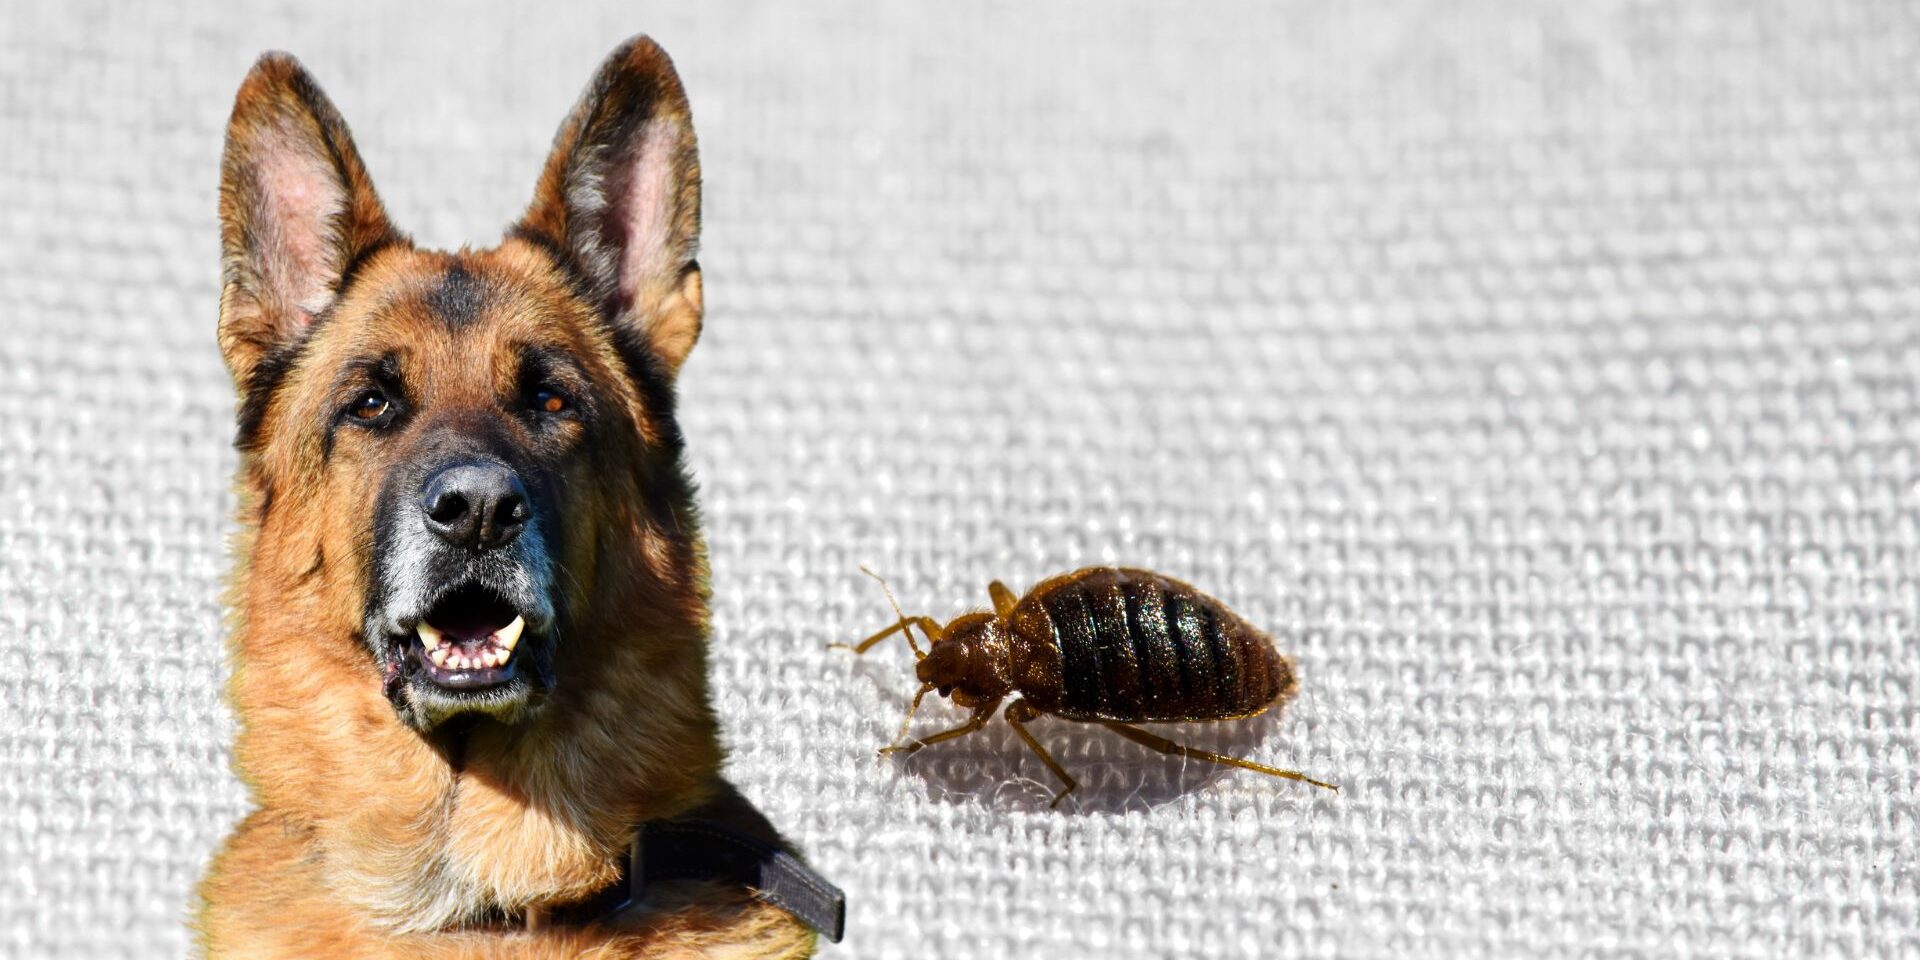 M2016-How-Effective-Are-Bed-Bug-Trained-Dogs-featured-64122a6769694